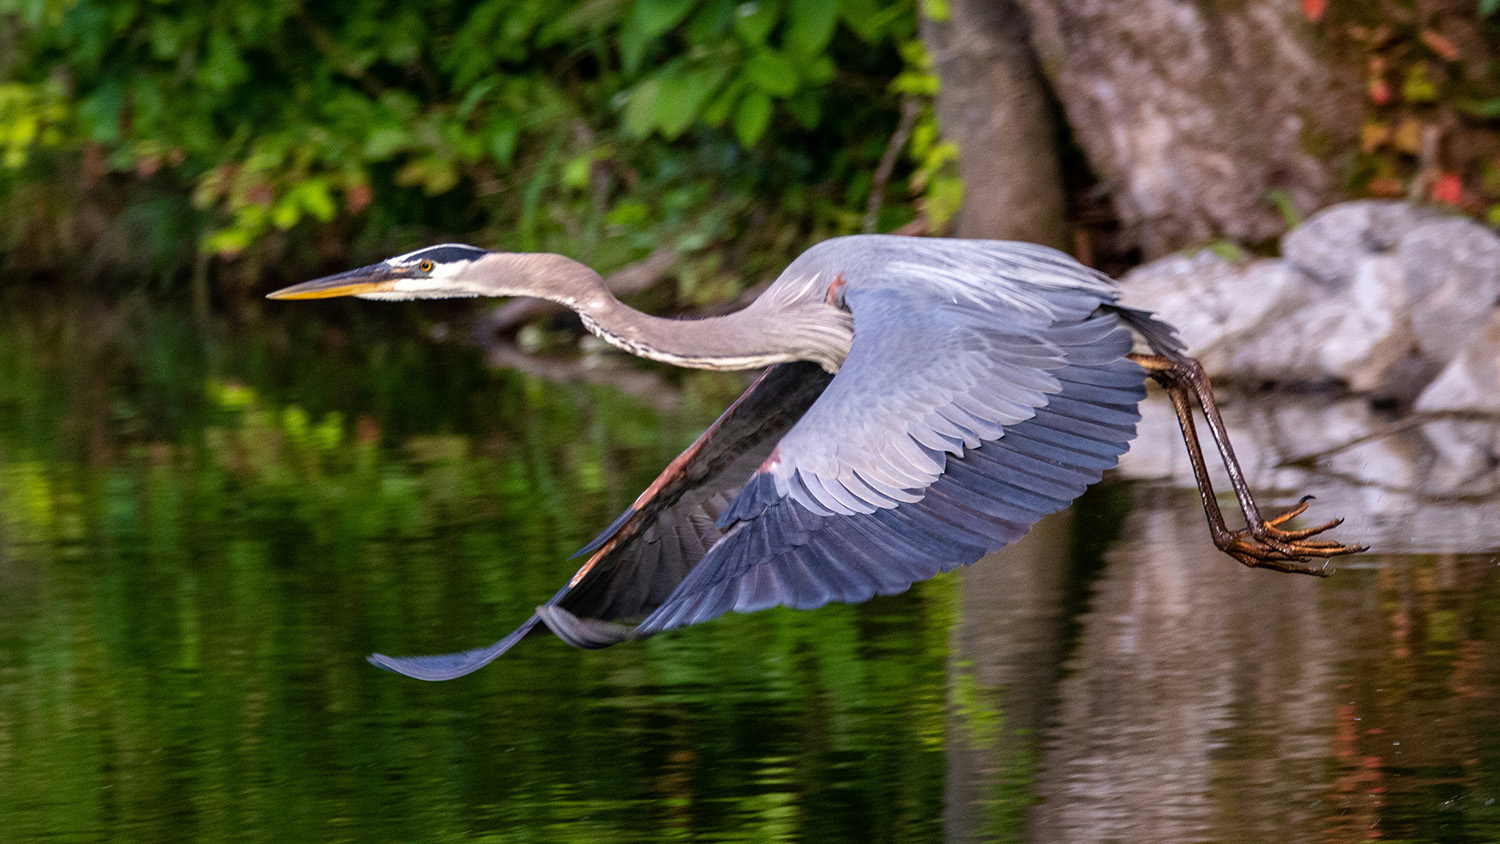 A great blue heron takes flight.